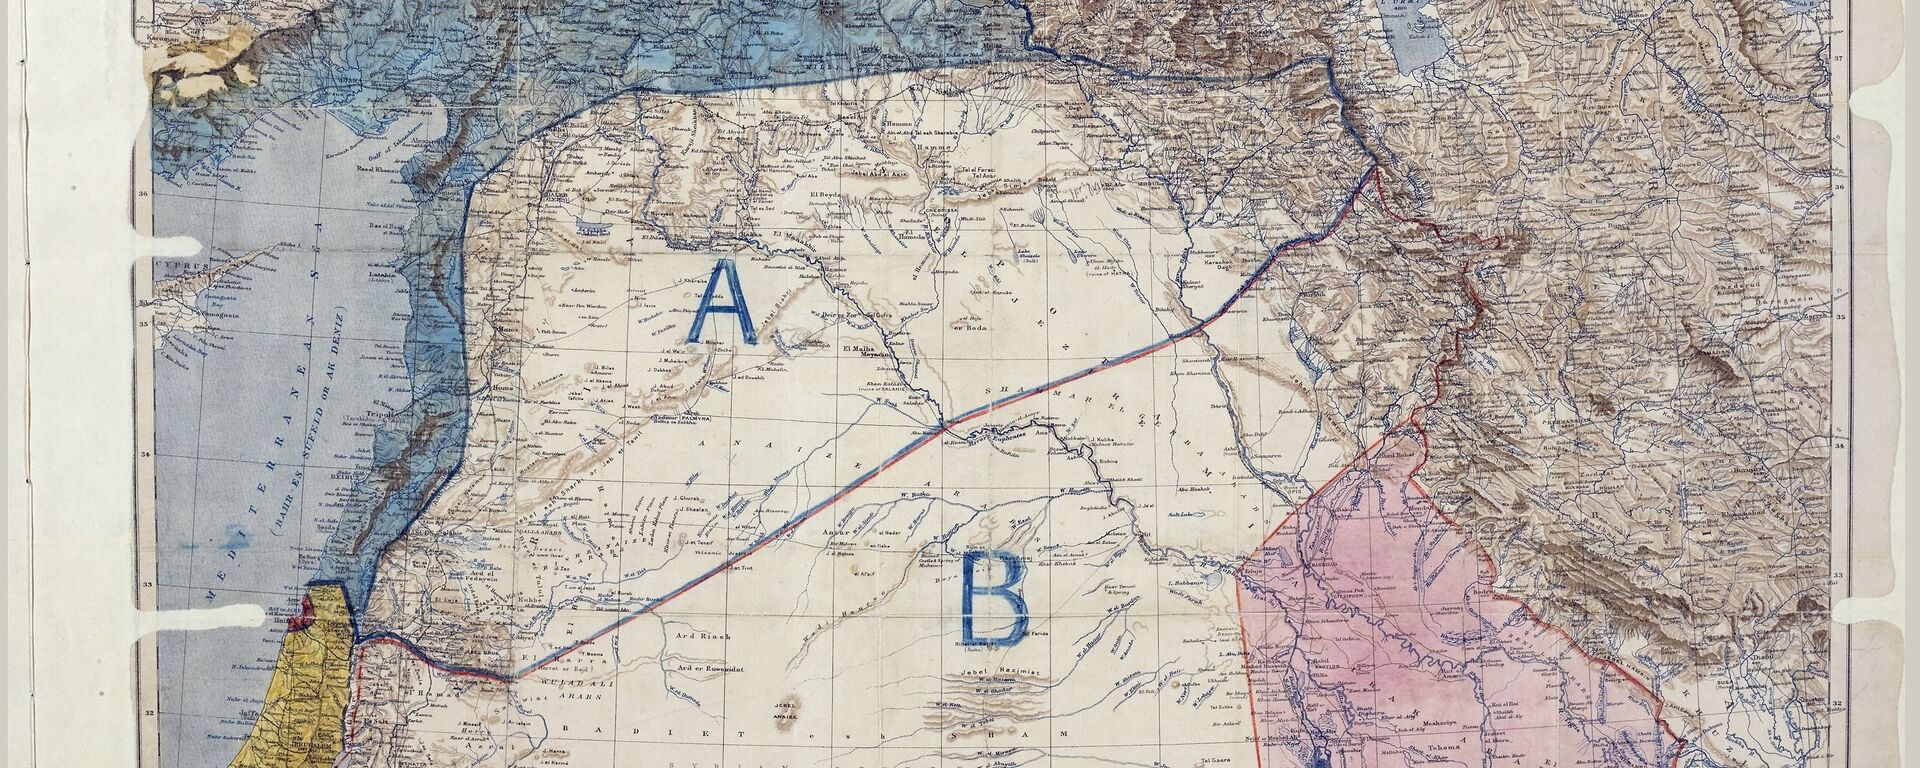 Map of Sykes–Picot Agreement showing Eastern Turkey in Asia, Syria and Western Persia, and areas of control and influence agreed between the British and the French. - Sputnik International, 1920, 19.05.2020